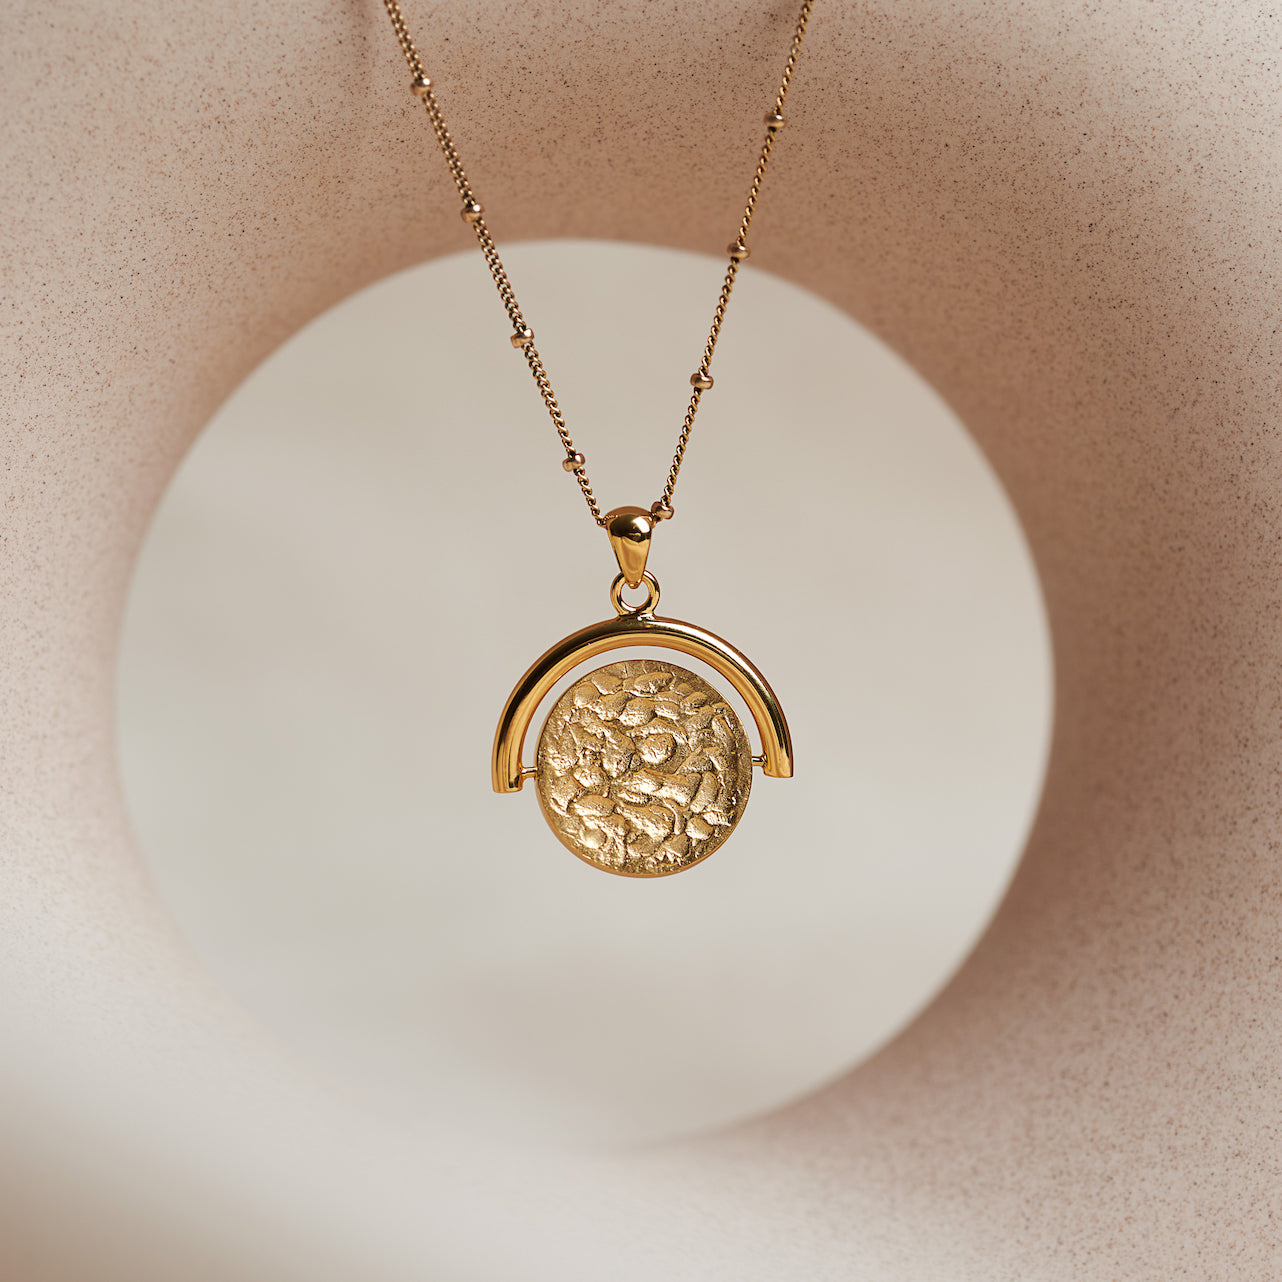 Designed by Megan Collins, the "Equilibrium Spinner" represents the power of embracing both the masculine and feminine energies within us all.